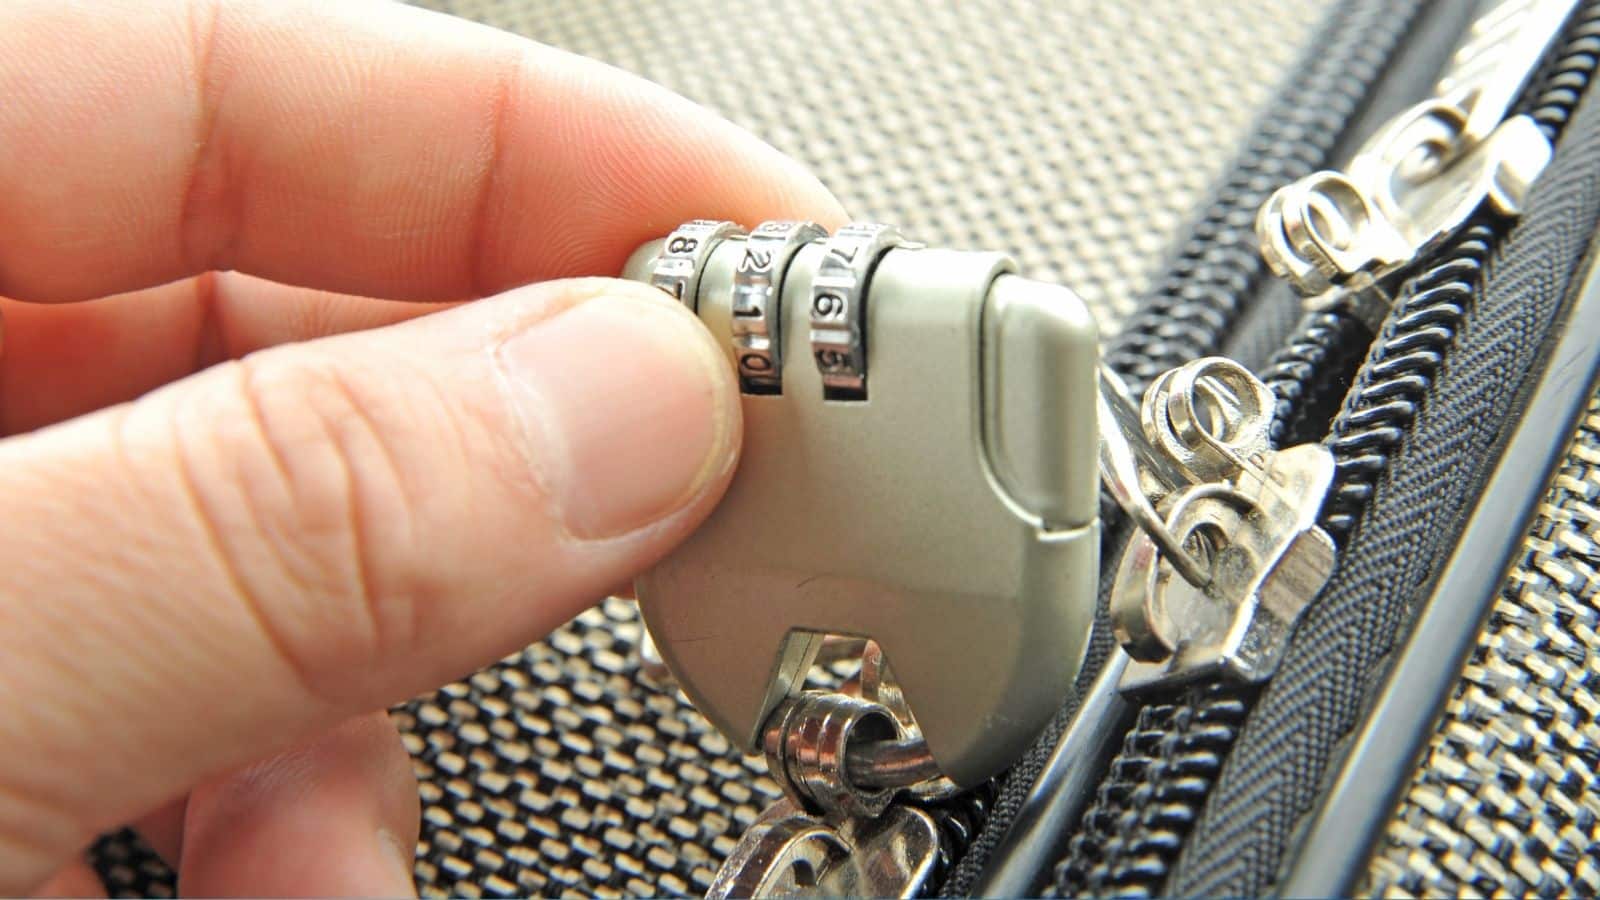 <p>Luggage locks offer additional protection from prying fingers to your bag. Perfect for when staying in hostels or using shared transport etc Go for TSA approved locks, this enables airport security to open it should they need to without destroying your lock.</p>